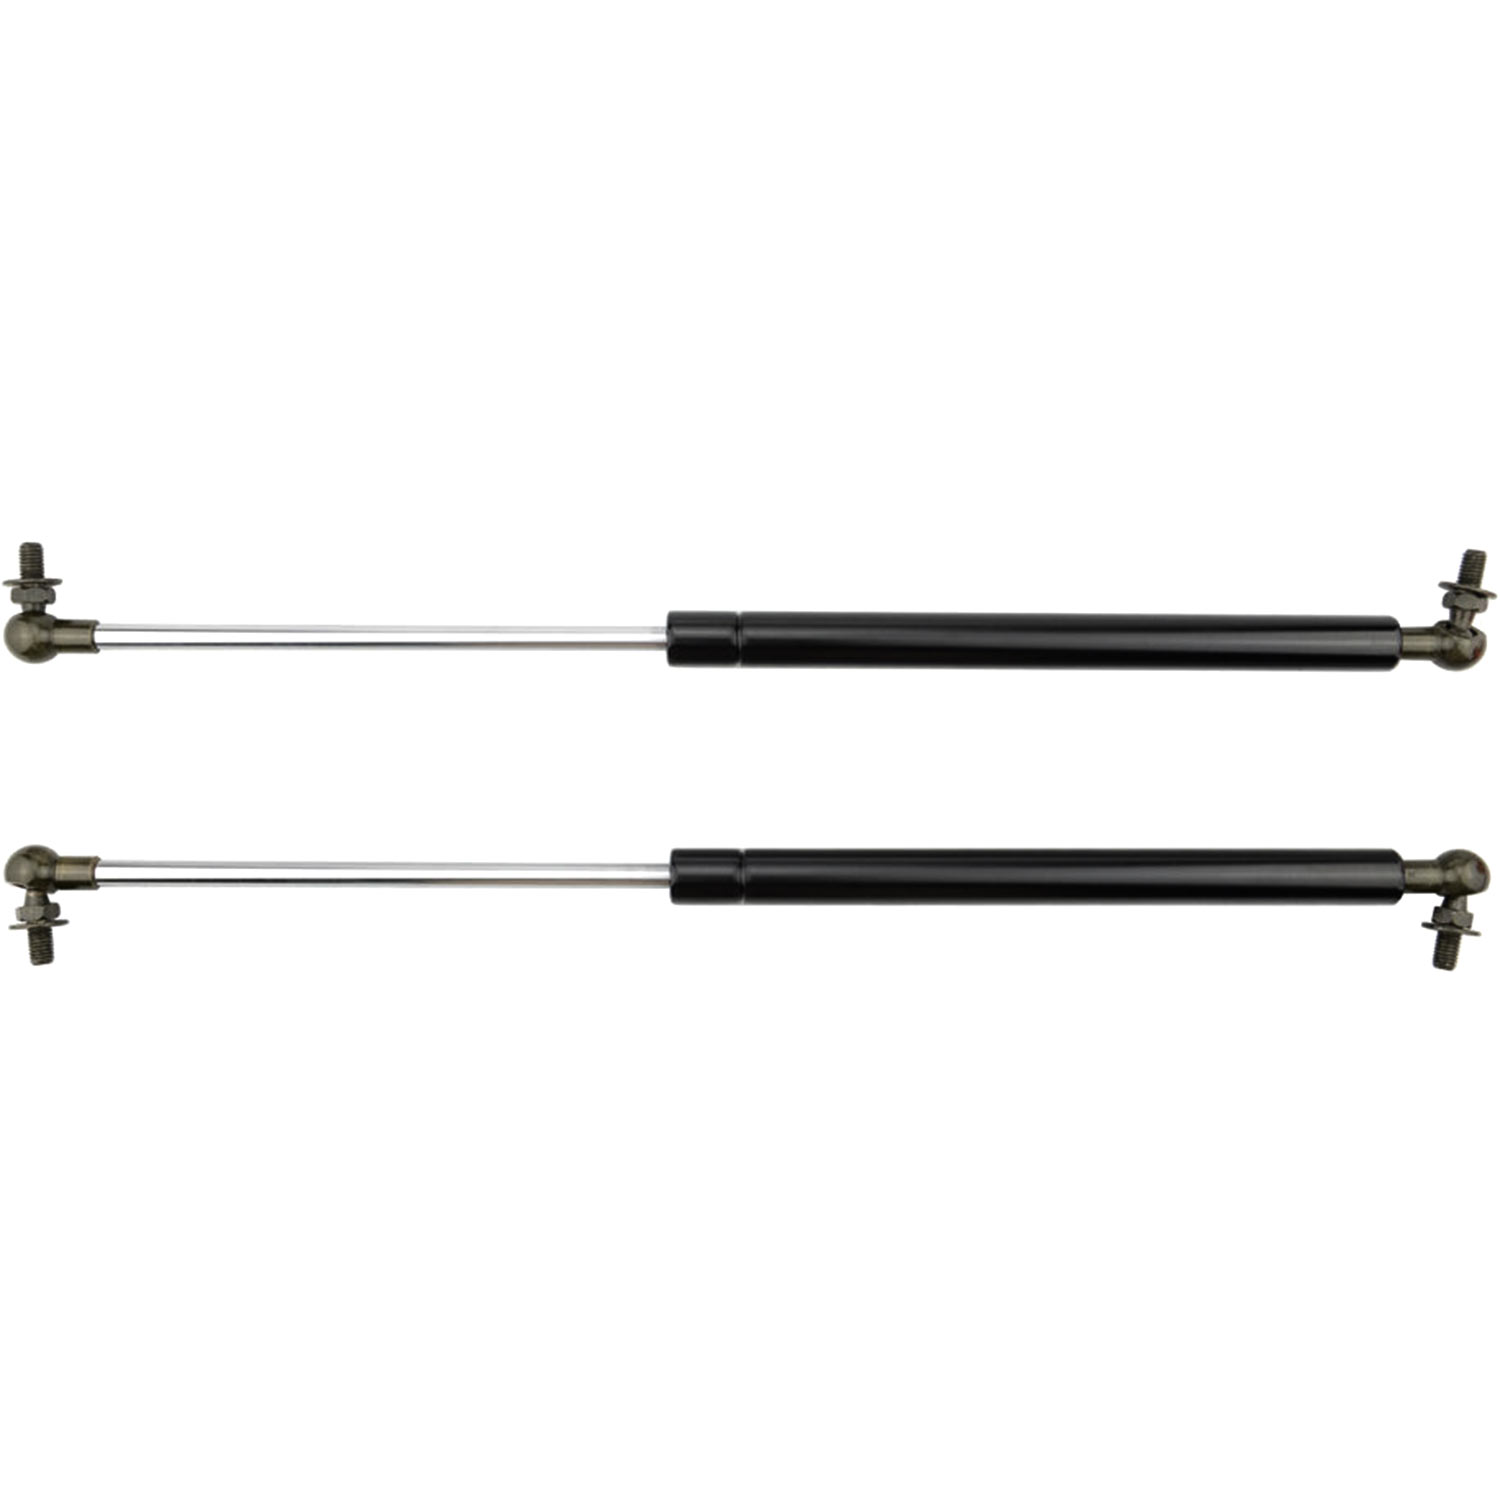 Krator 2pcs 6228 Replacement Hood Lift Supports, Gas Strut Prop Arms, Gas Spring Shocks, Lid Support, Lid Stay, Force Output 396N - 6228, 036150, 5345039225, 5344069065, 5345069065, 53440-69065 - image 4 of 5